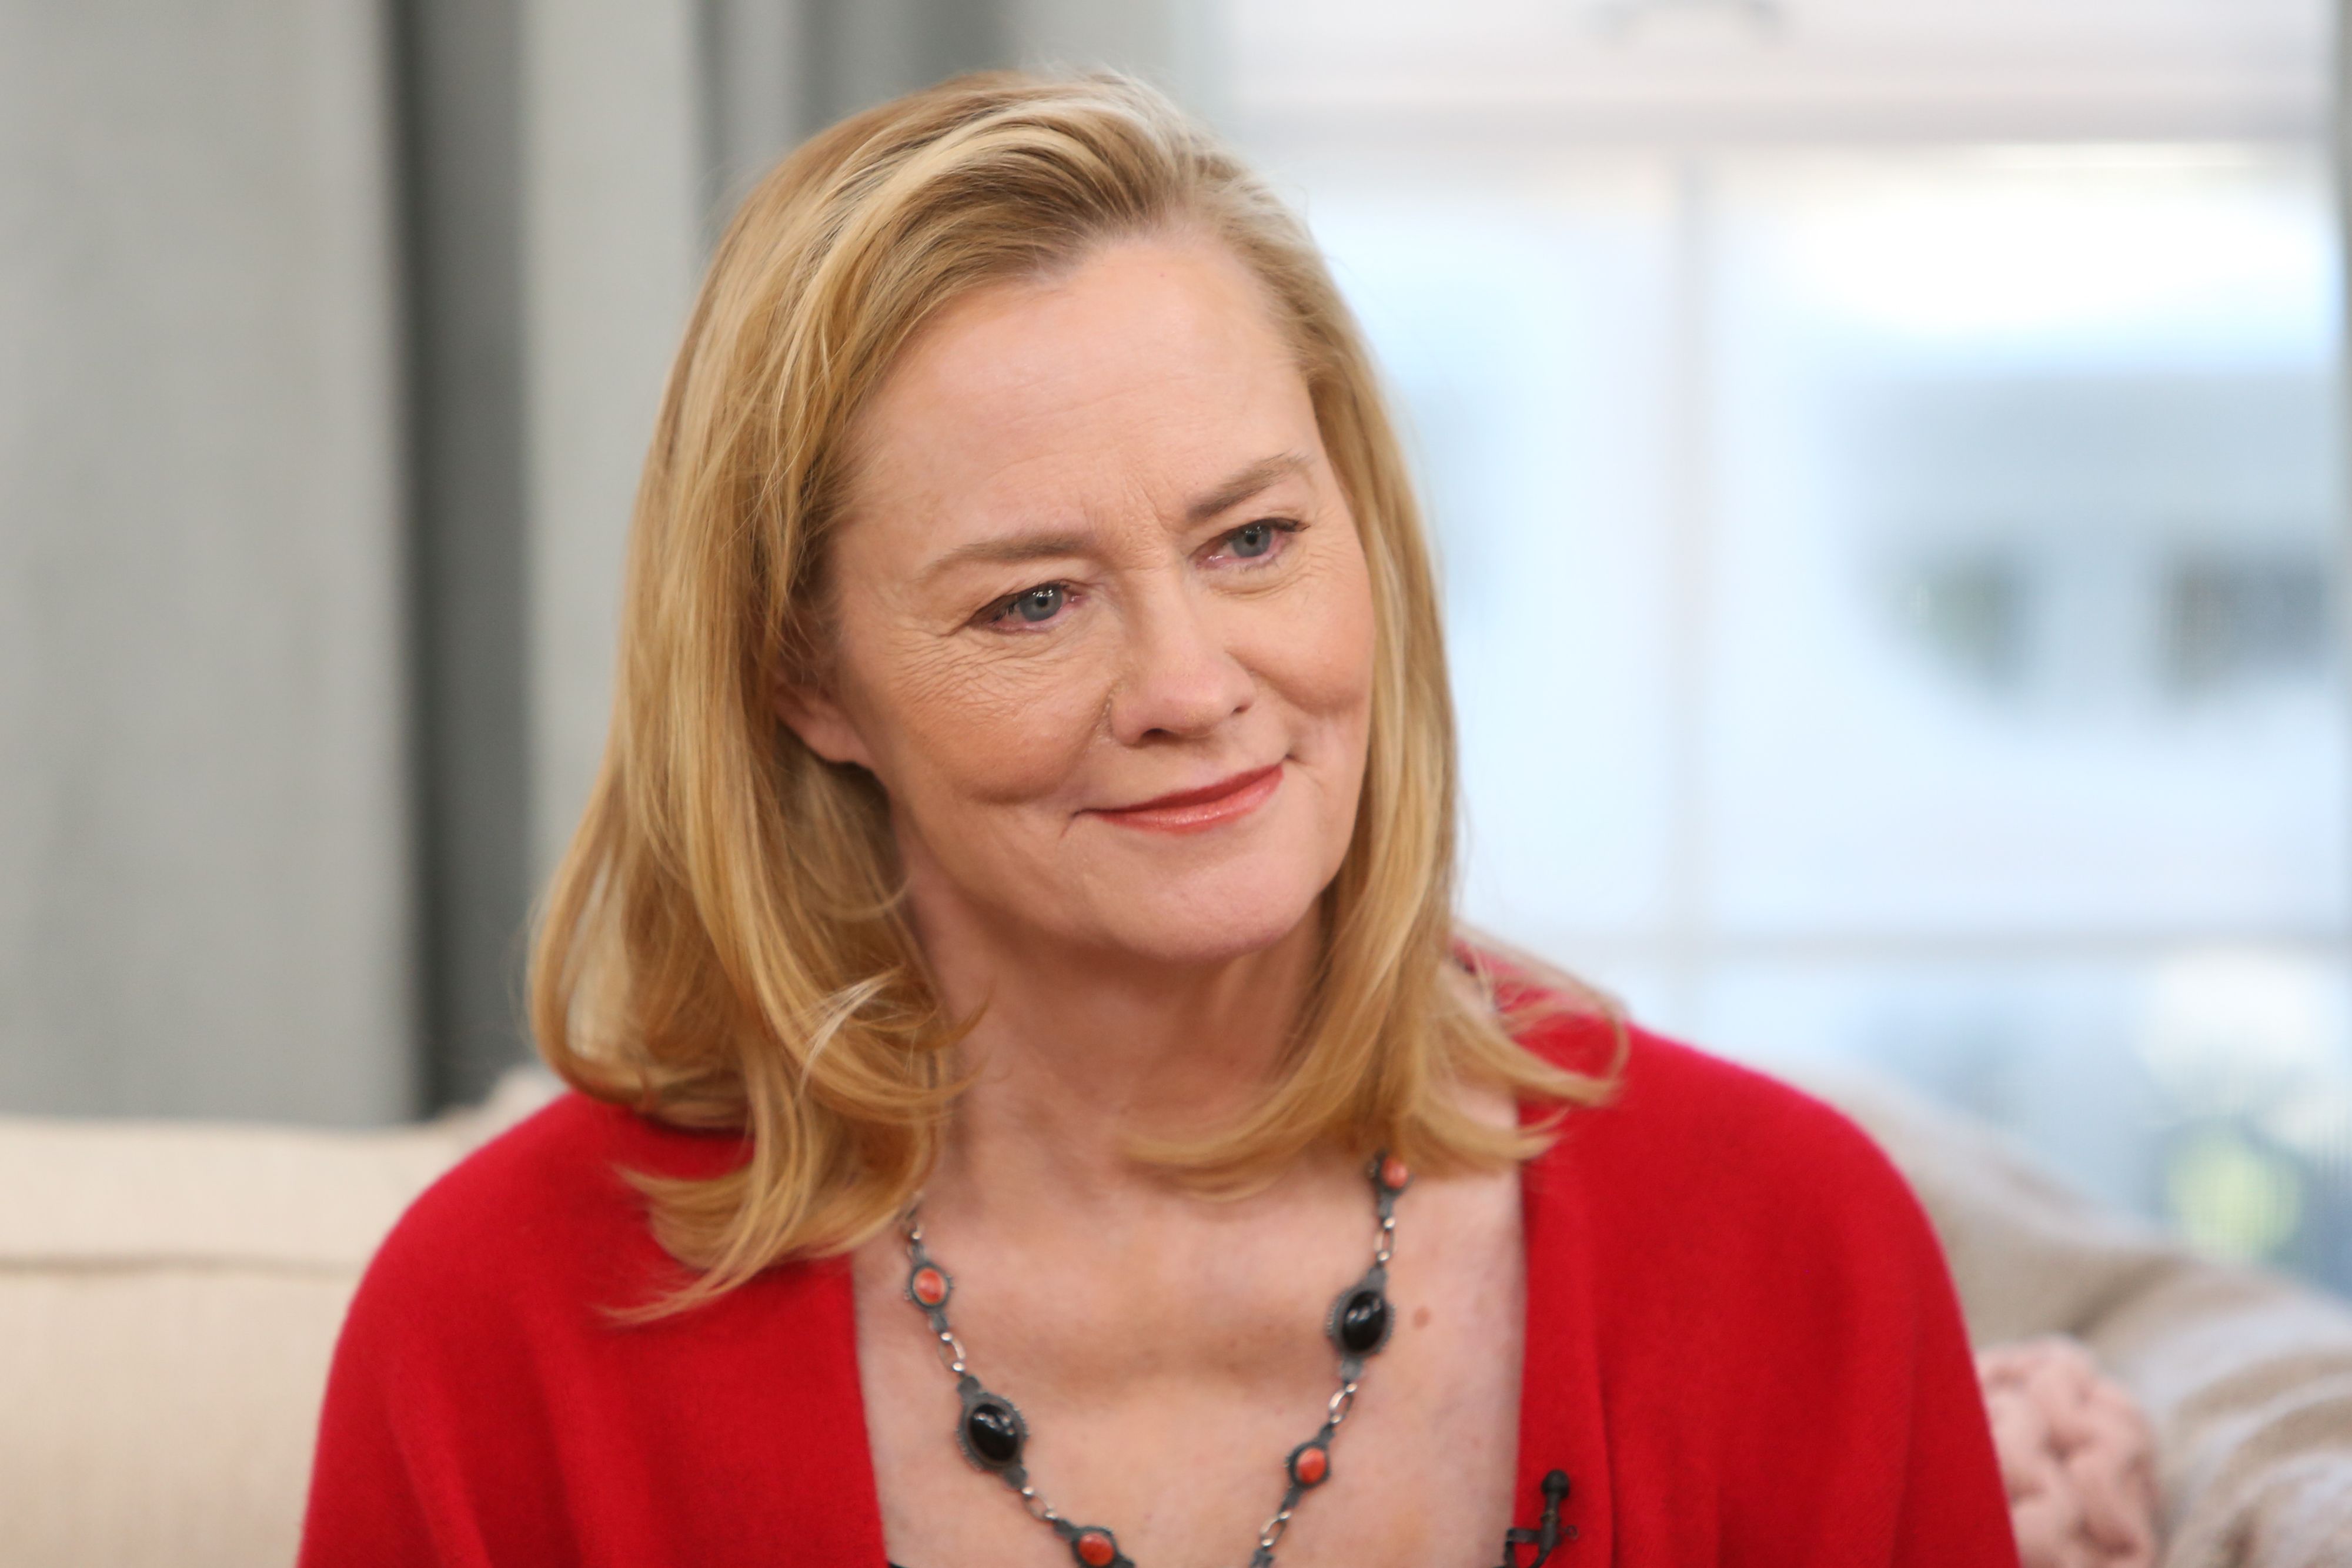 Cybill Shepherd visits Hallmark's "Home & Family" at Universal Studios Hollywood on January 25, 2019, in Universal City, California. | Source: Getty Images